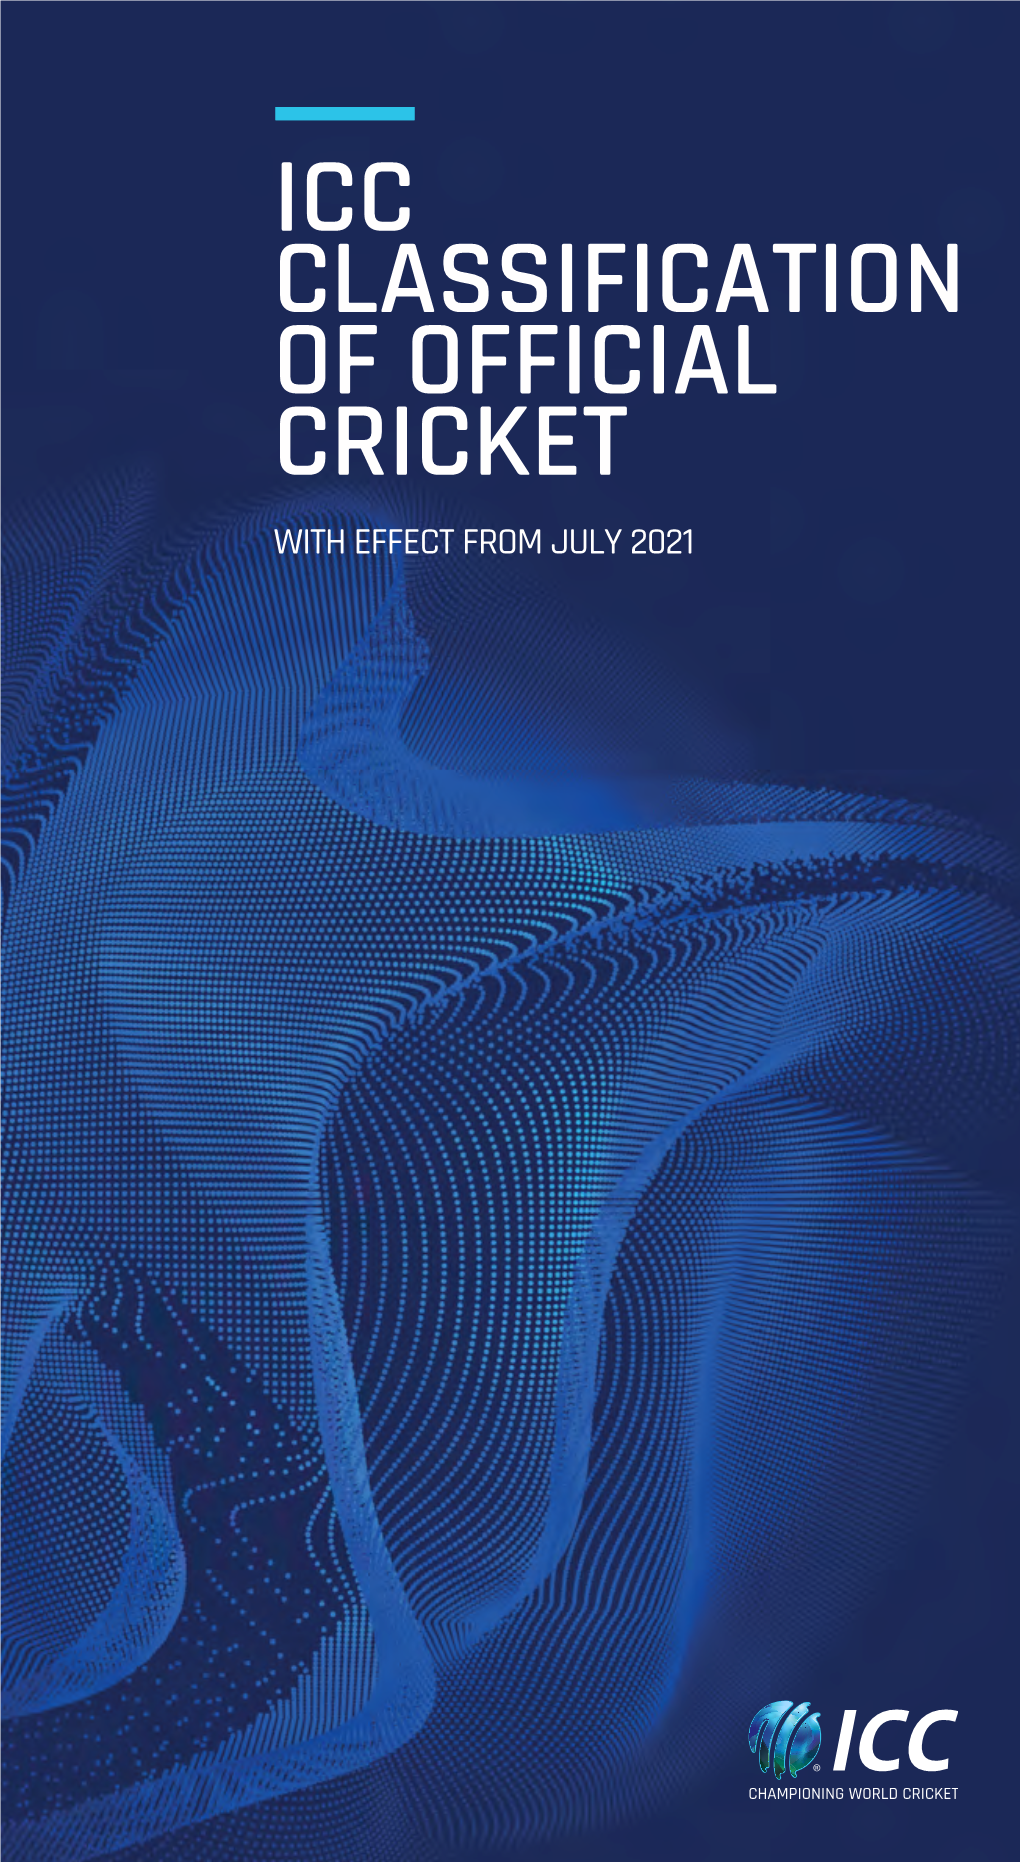 Icc Classification of Official Cricket with Effect from July 2021 Icc Classification of Official Cricket with Effect from July 2021